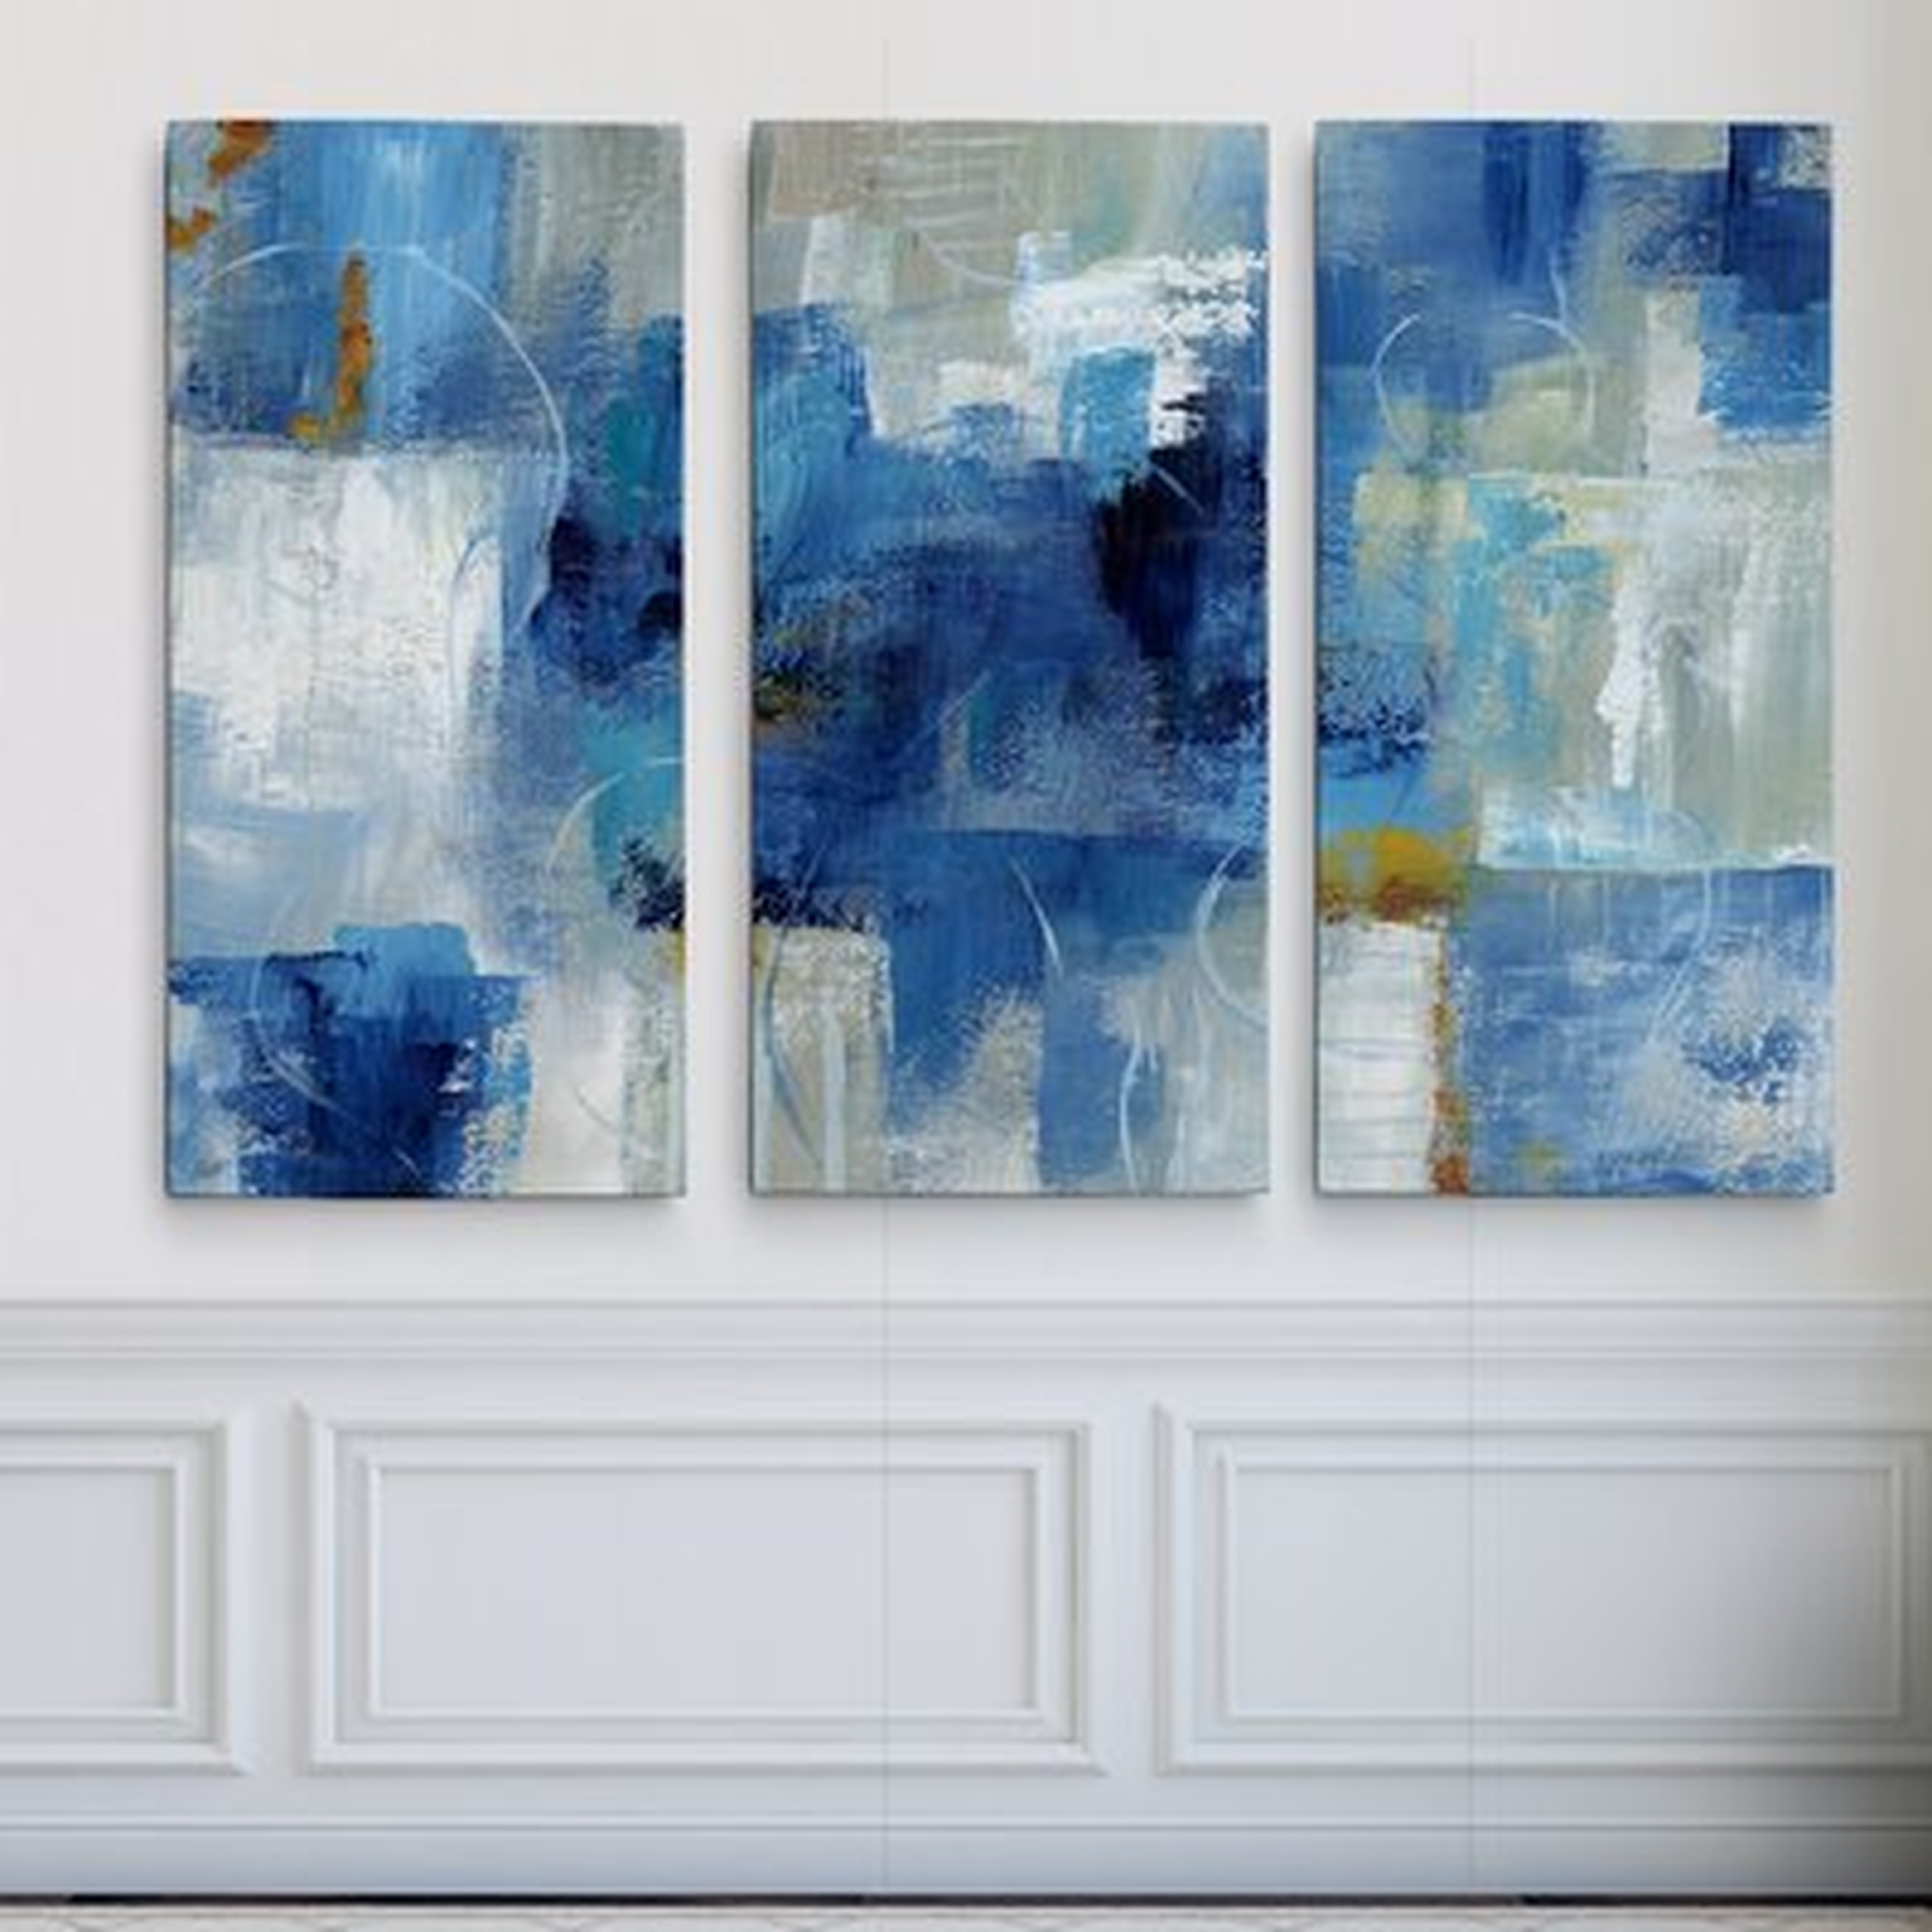 'Blue Morning' Acrylic Painting Print Multi-Piece Image on Gallery Wrapped Canvas - Wayfair